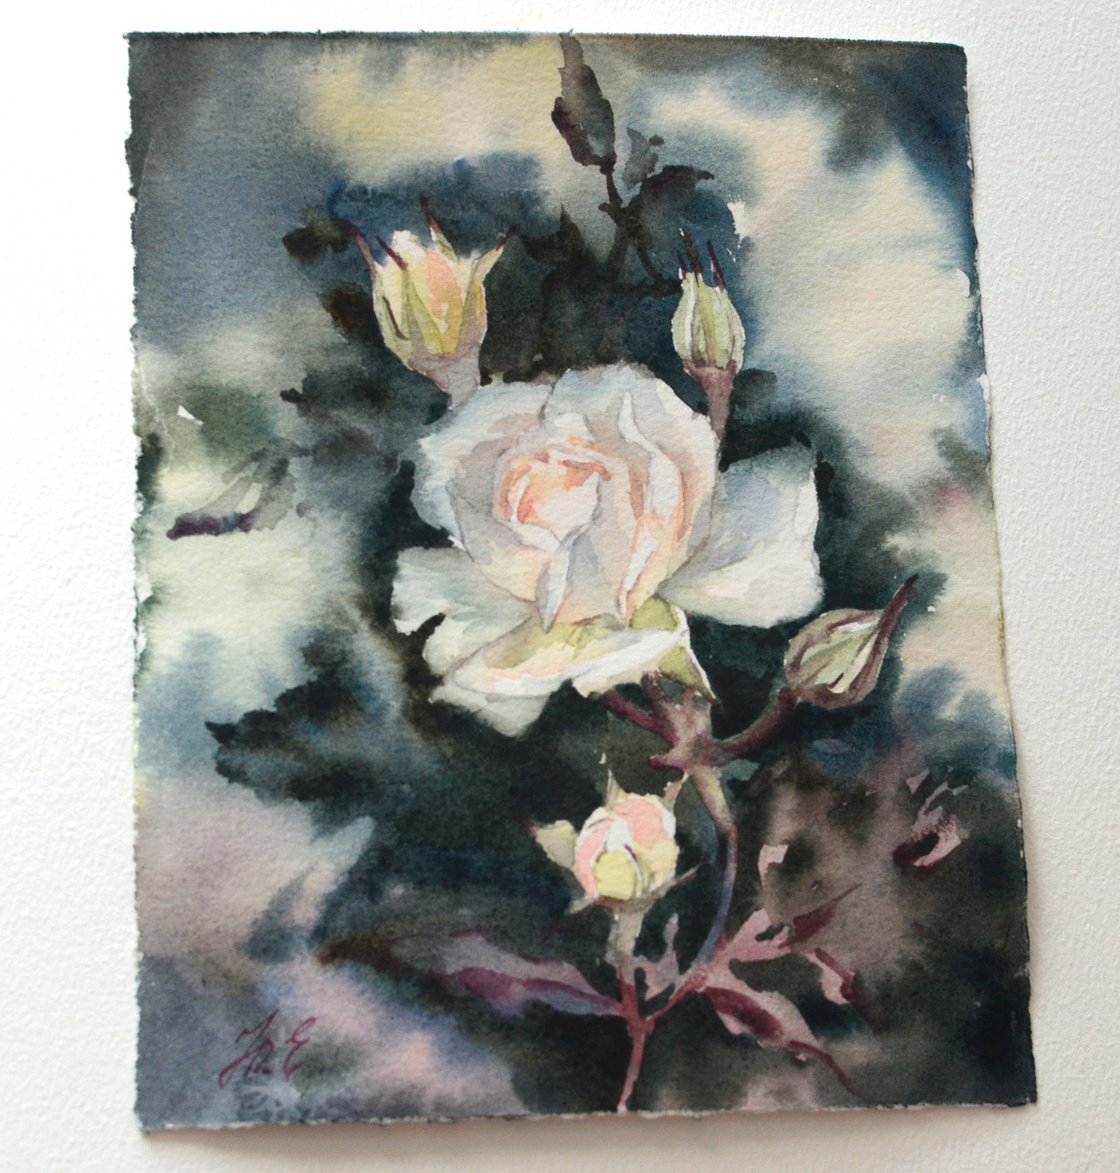 White rose in gouache paint on paper 7x10 inch. This fun study was painted  from life a couple days ago while on my trip in washington…